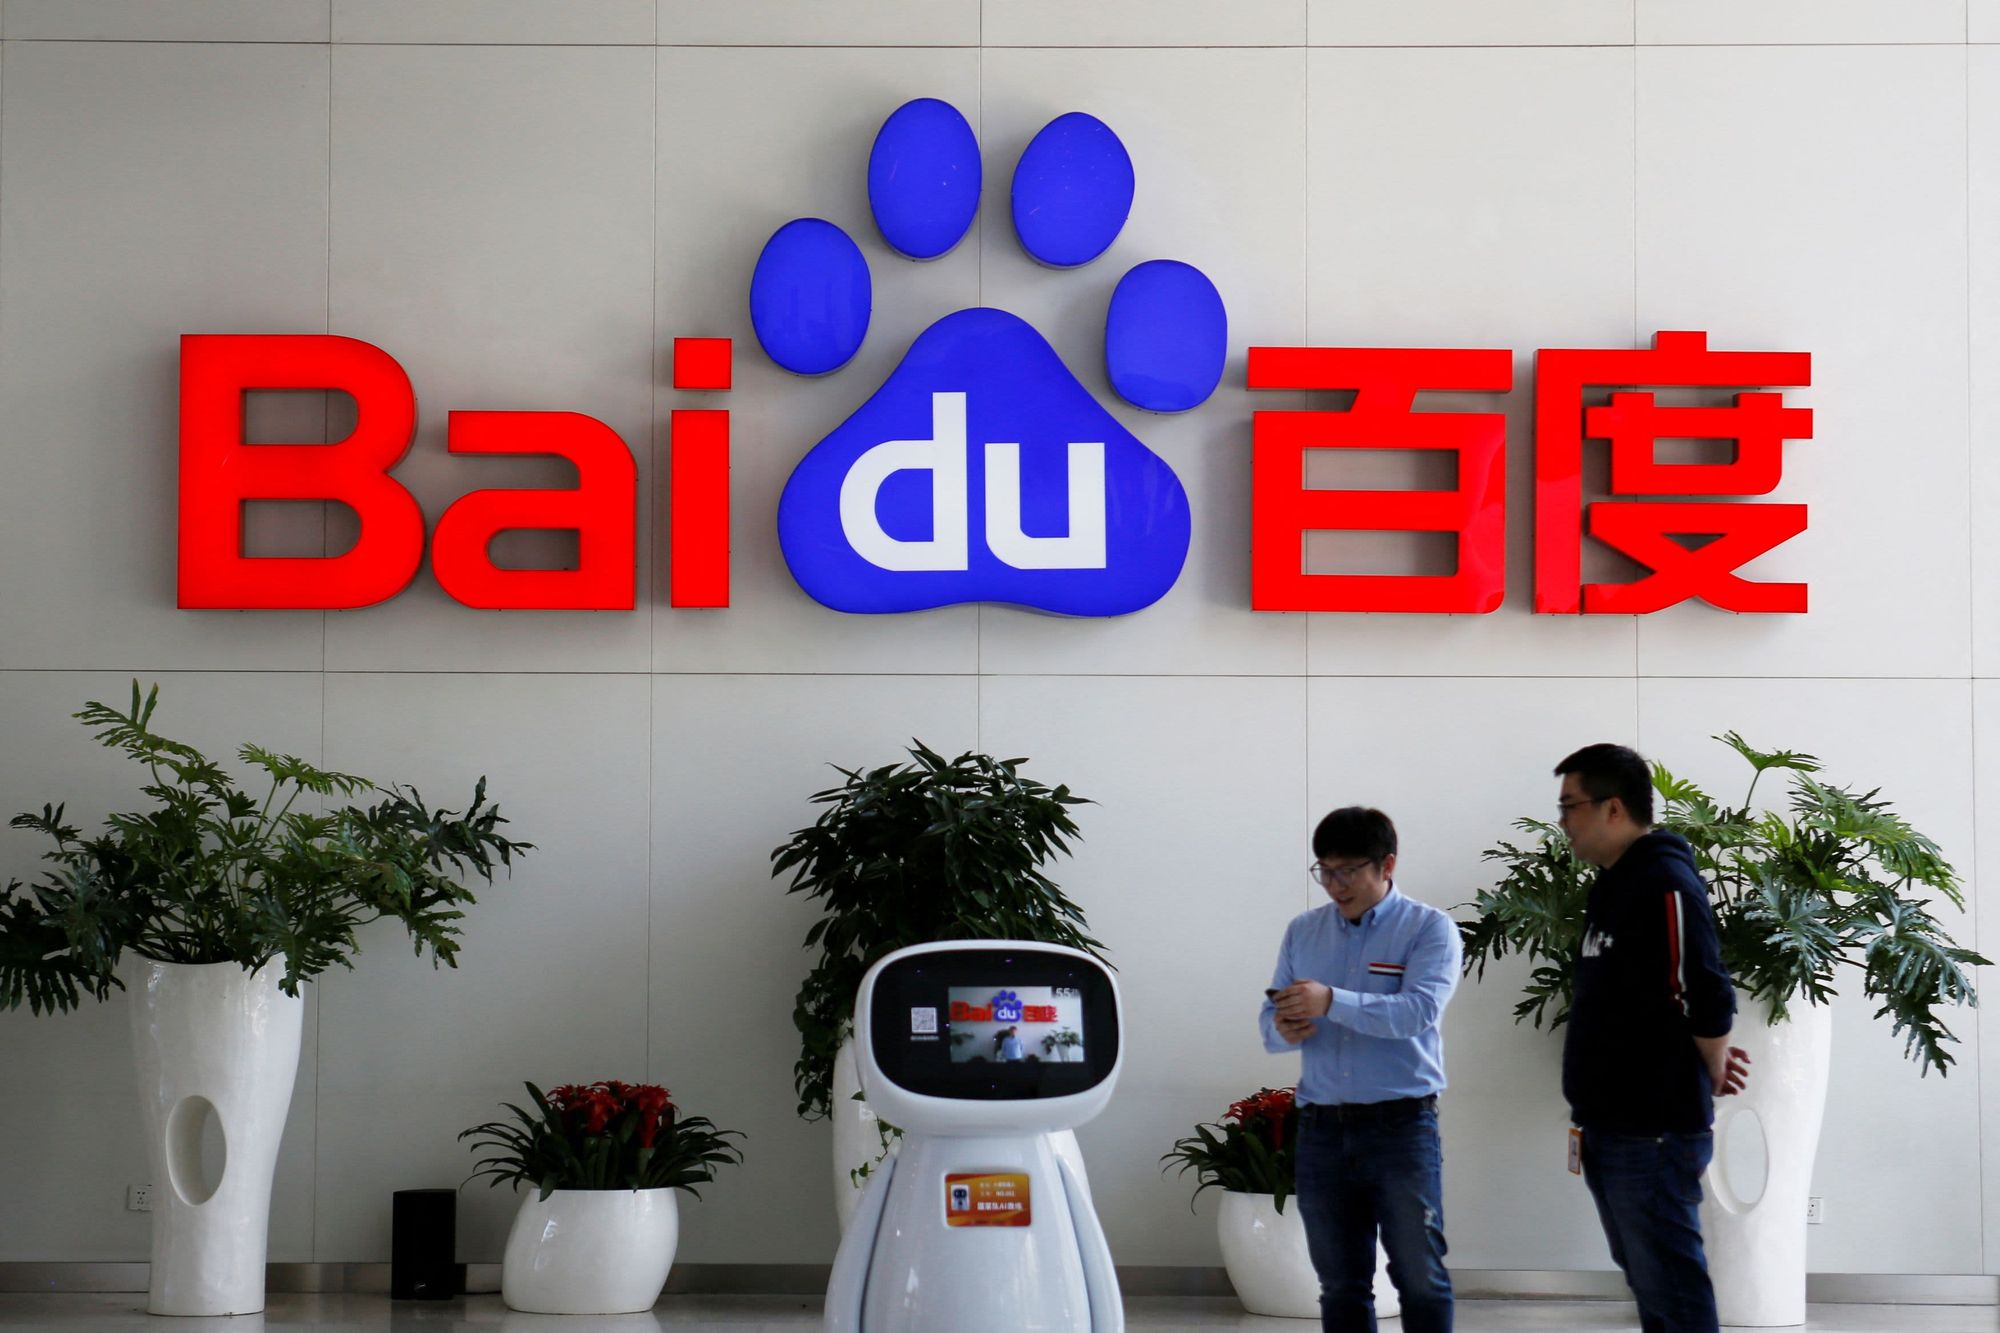 Samsung replaces Google’s AI with Baidu’s Ernie on its Galaxy S24 phones in China